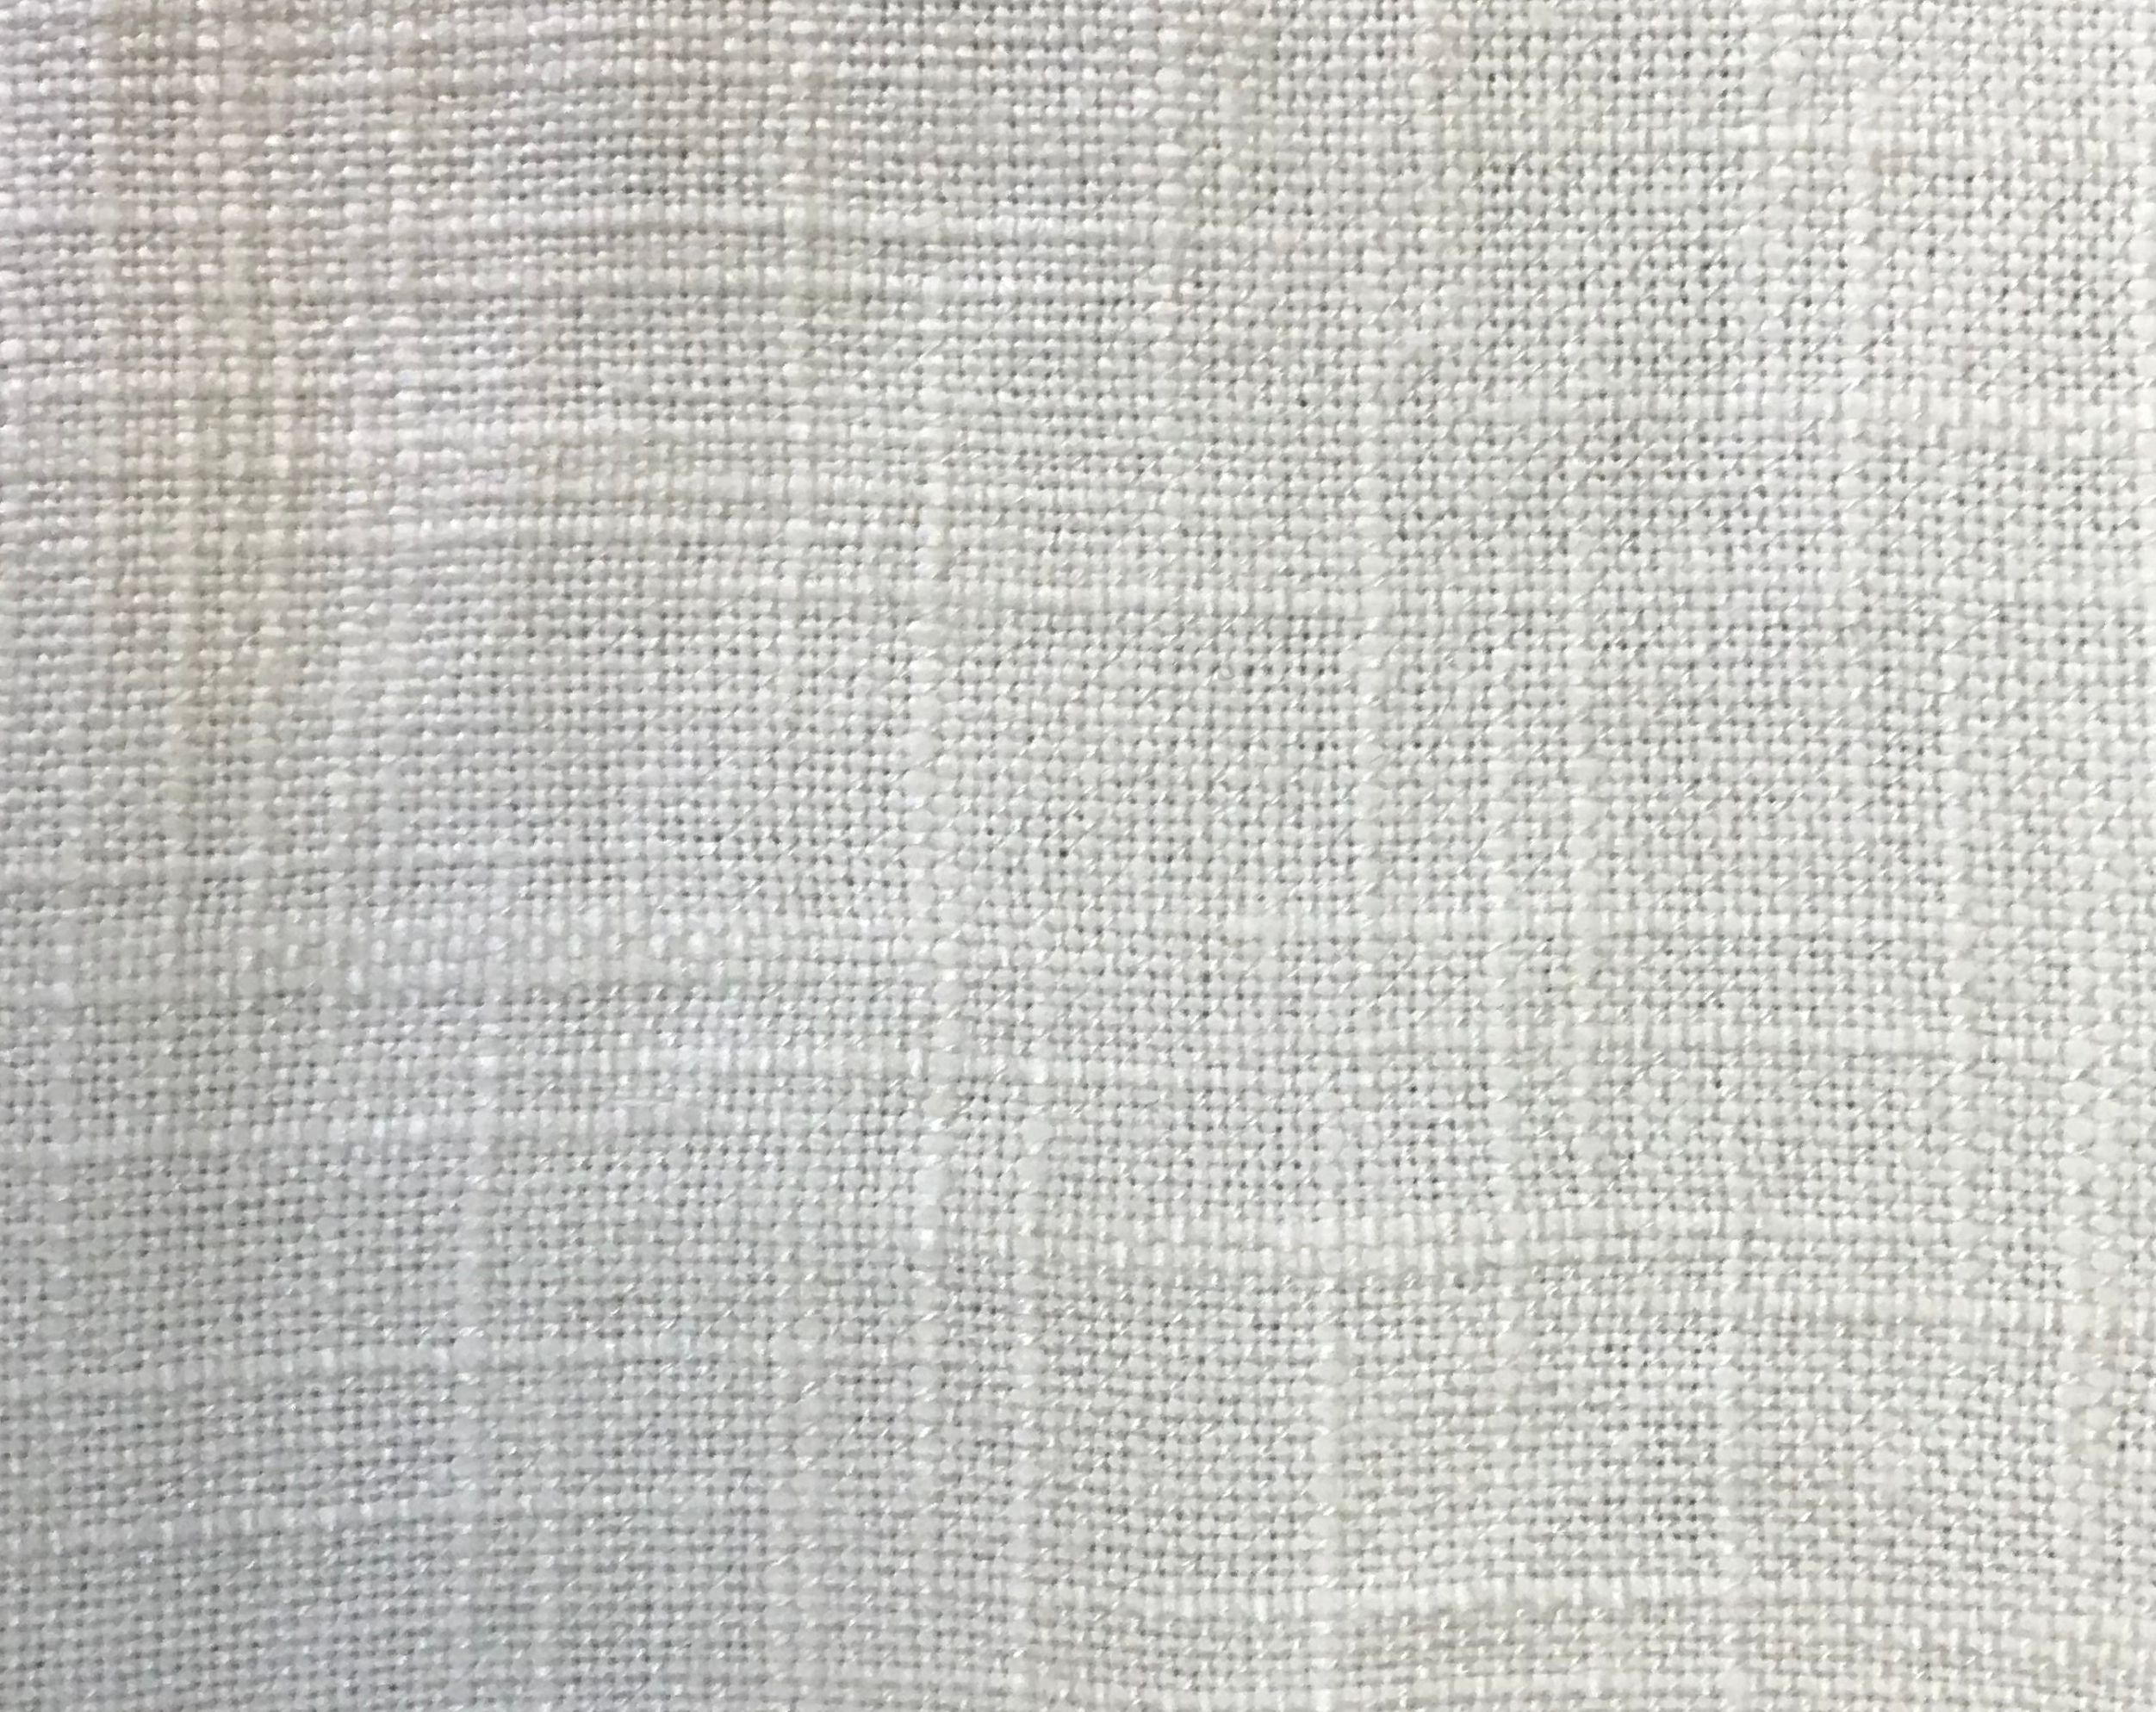 Ari fabric in ivory color - pattern number LM 00011009 - by Scalamandre in the Old World Weavers collection